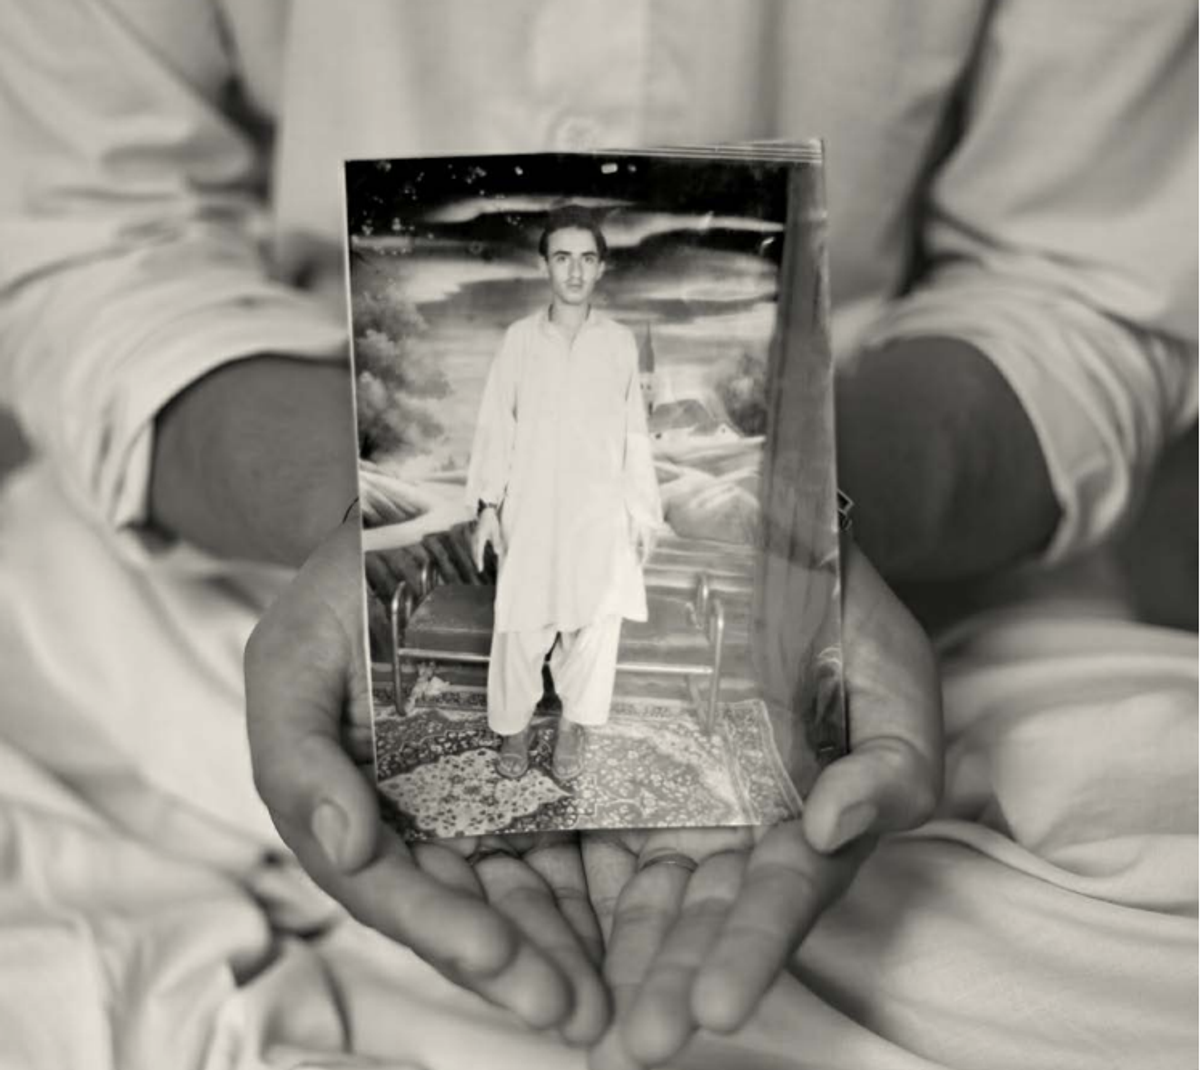  Image of Bagram detainee, taken into U.S. custody at only 14 years old (Justice Project Pakistan)    